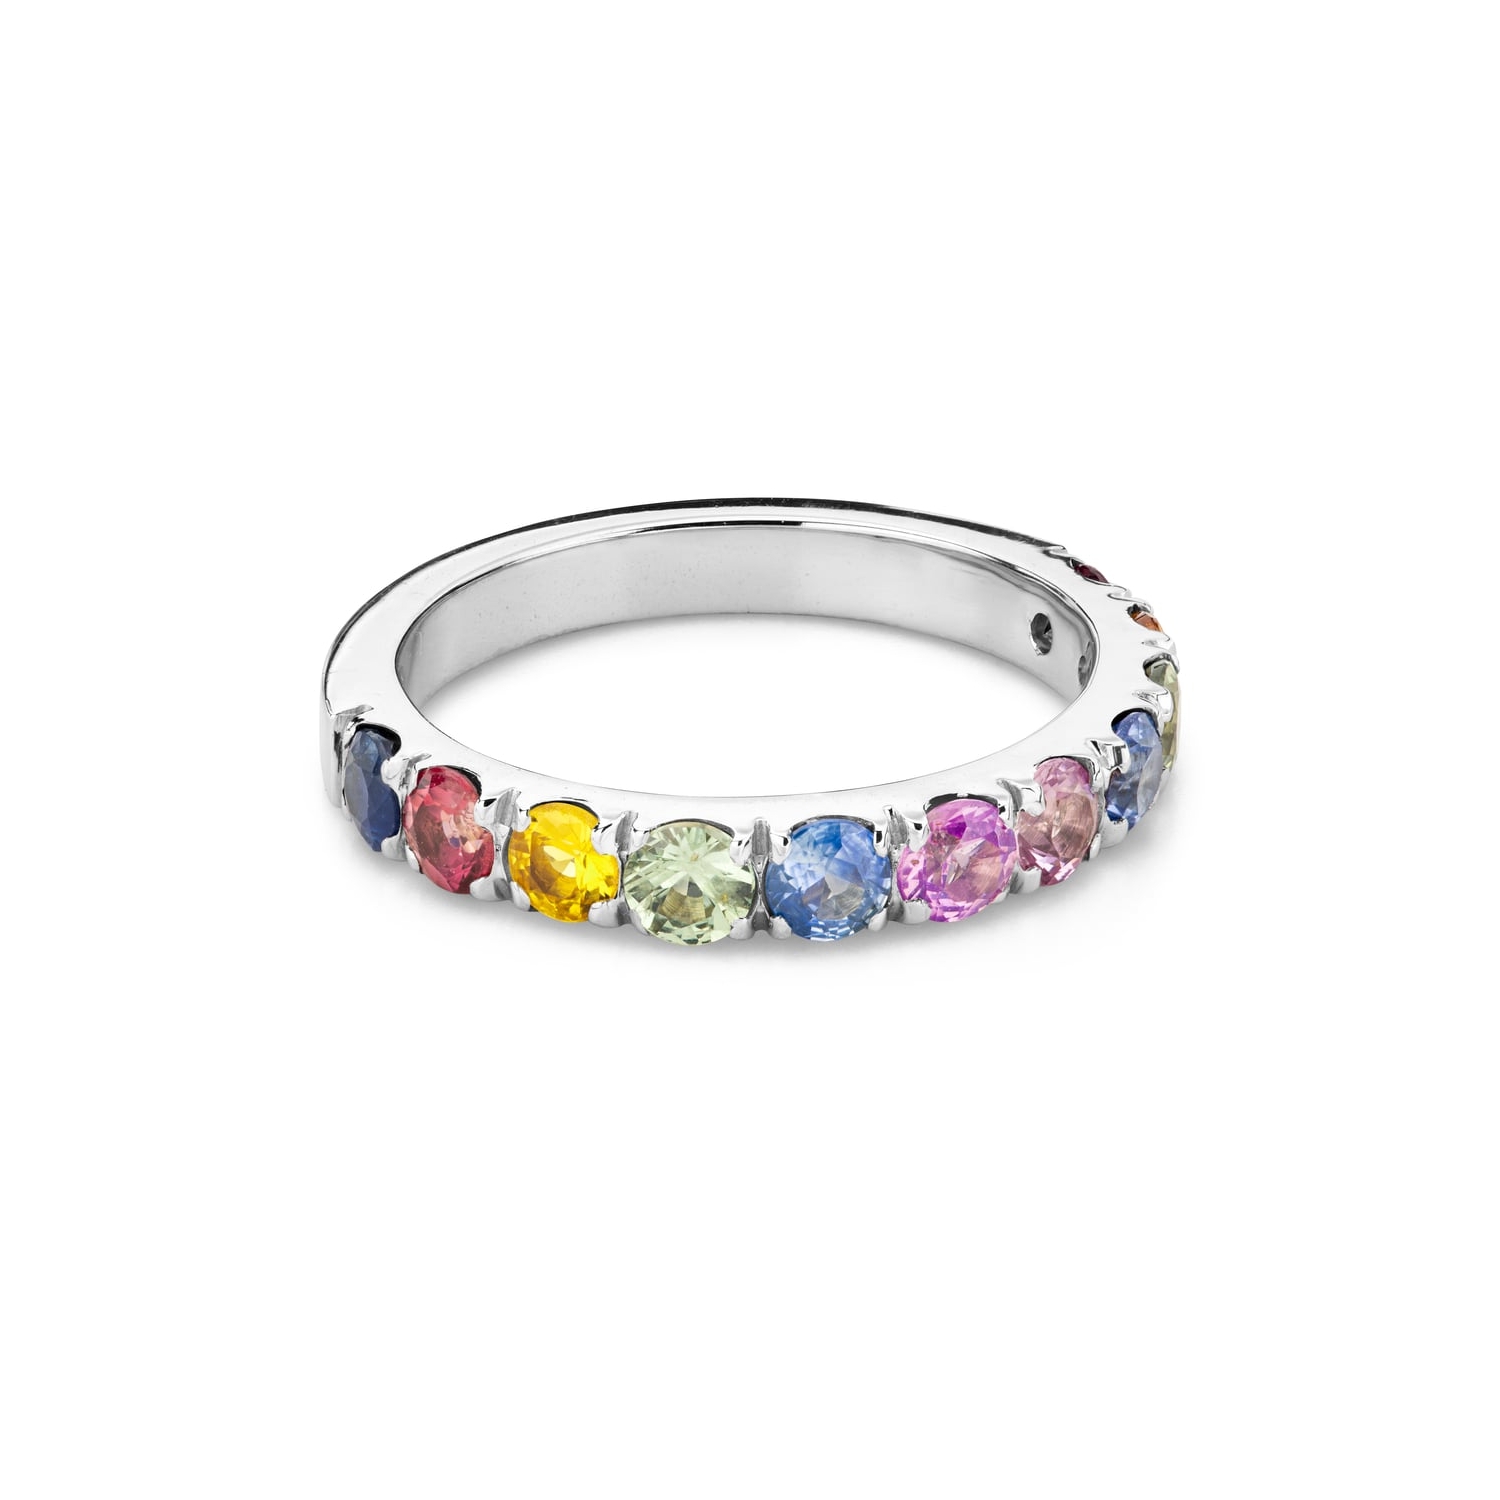 Engagement ring with gemstones "Colors 131"